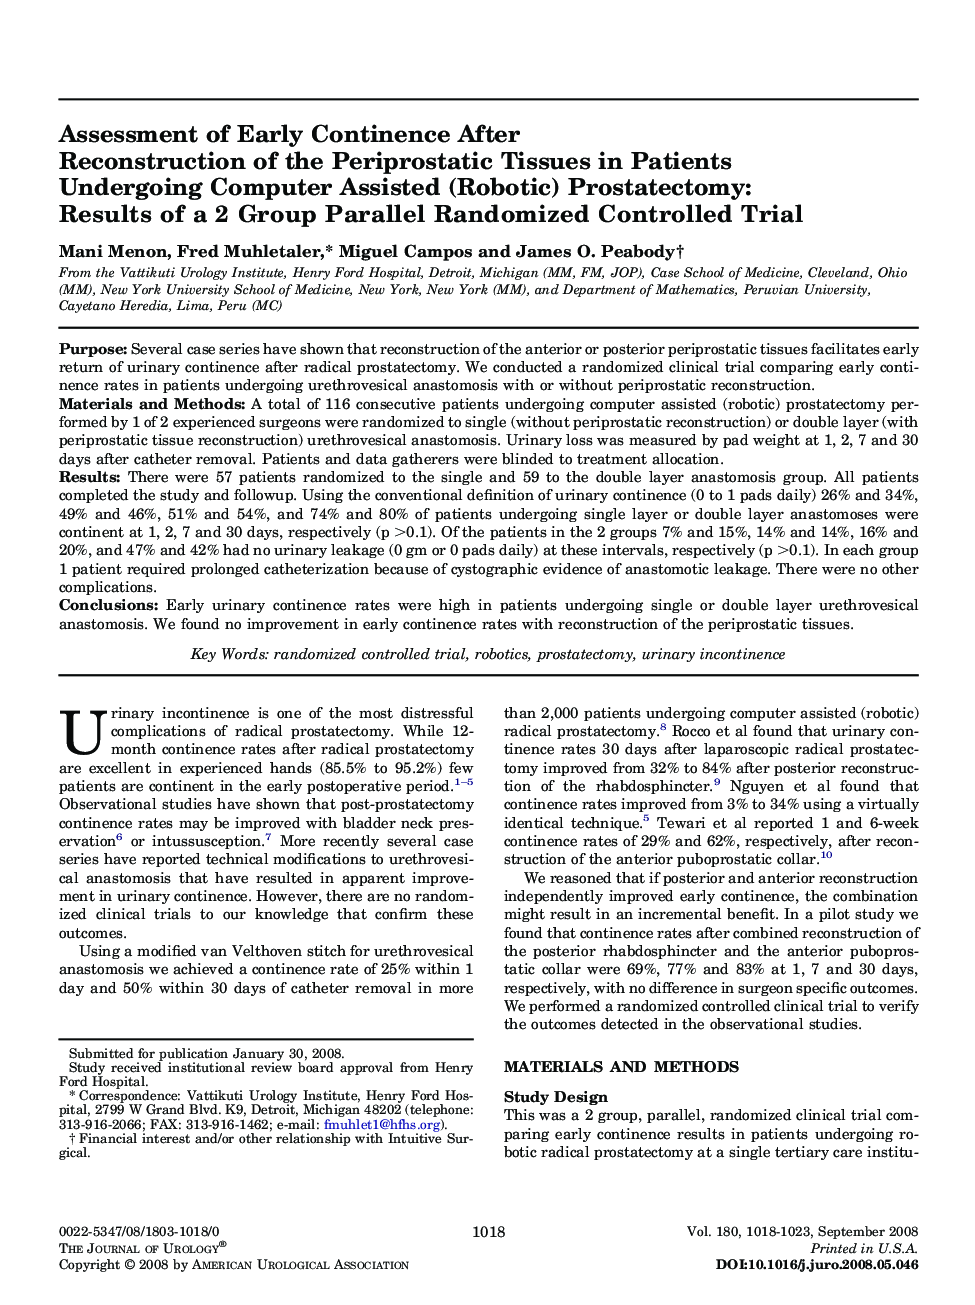 Assessment of Early Continence After Reconstruction of the Periprostatic Tissues in Patients Undergoing Computer Assisted (Robotic) Prostatectomy: Results of a 2 Group Parallel Randomized Controlled Trial 